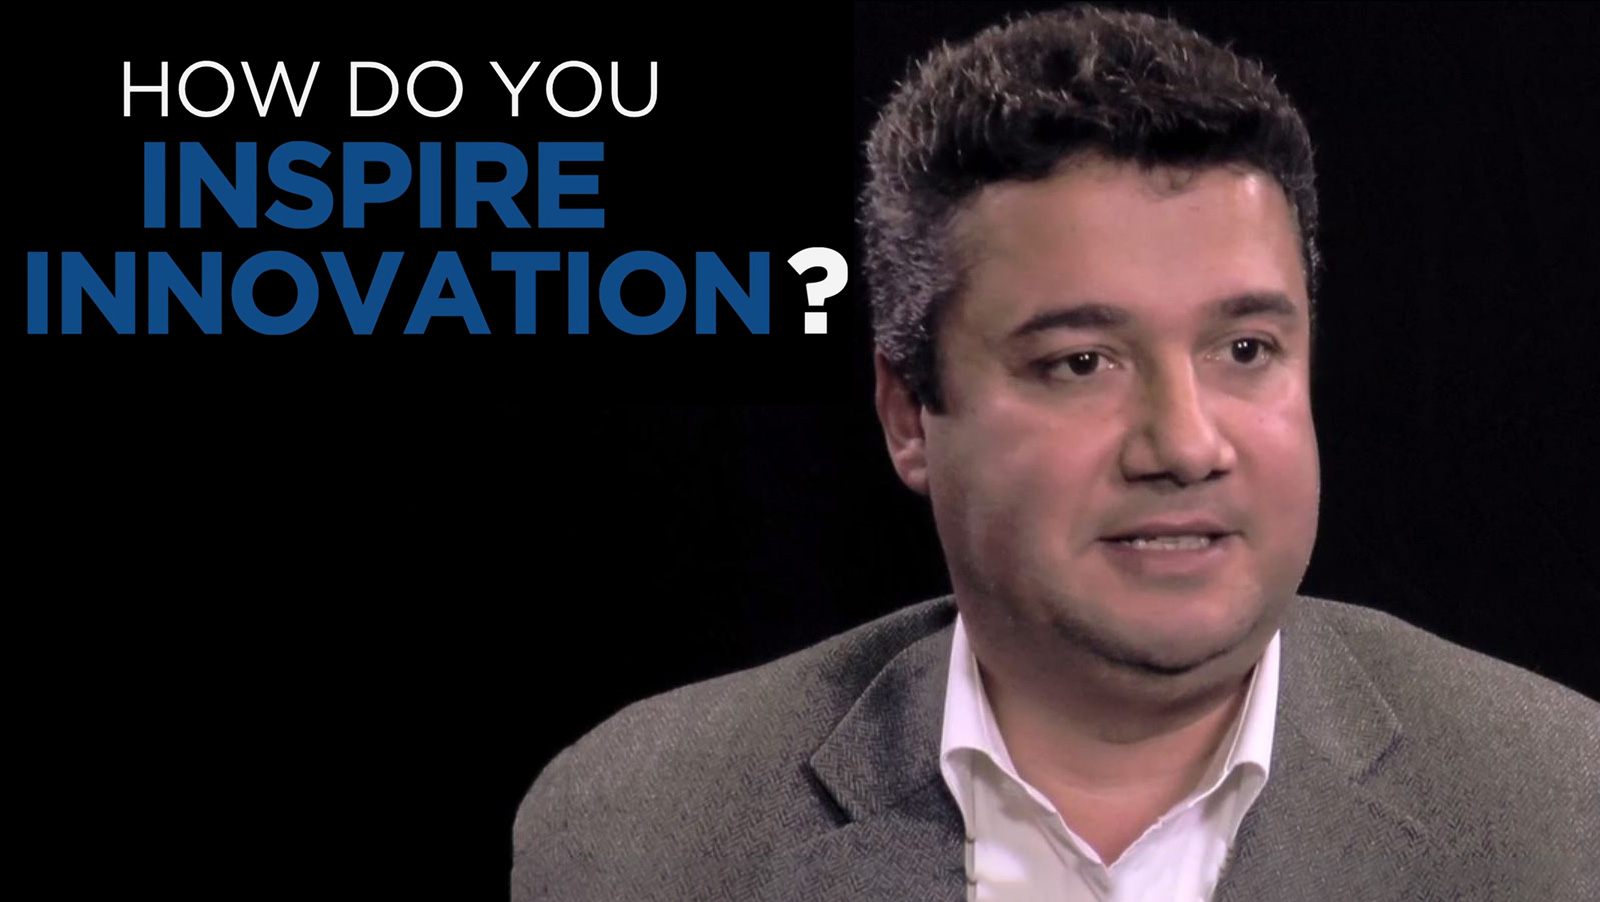 Hussein Chahine: Shared Experience - How do you inspire innovation?